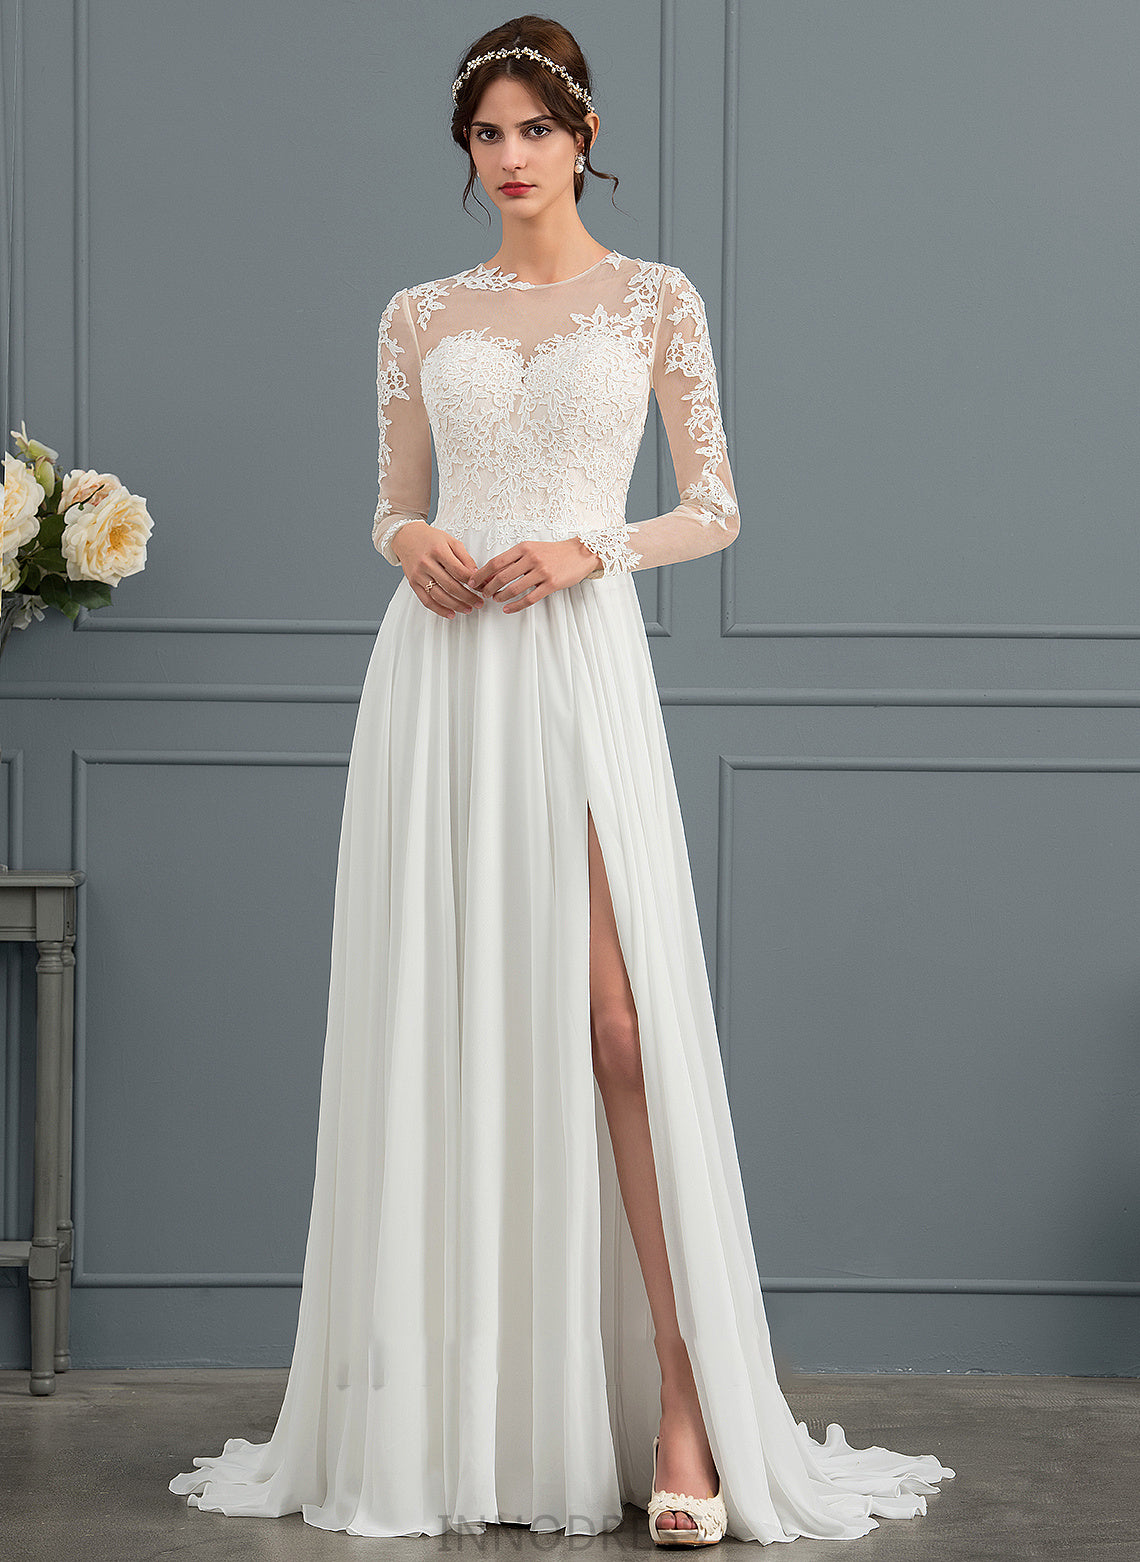 Wedding Dresses Appliques With Train A-Line Chiffon Illusion Dress Split Front Wedding Lace Finley Sweep